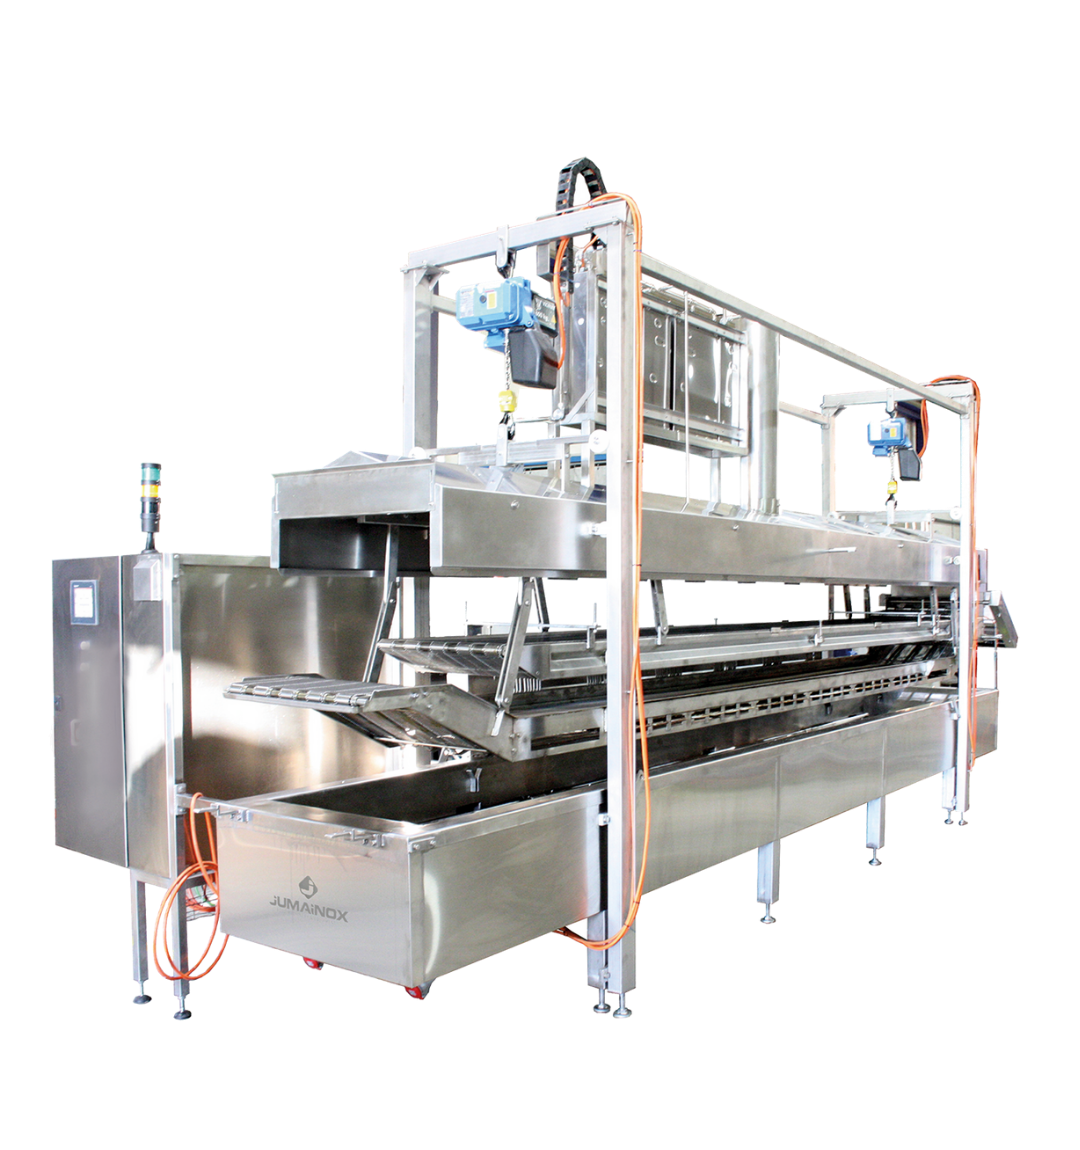 Jumainox Continuous Industrial Frying and Cooking Lines